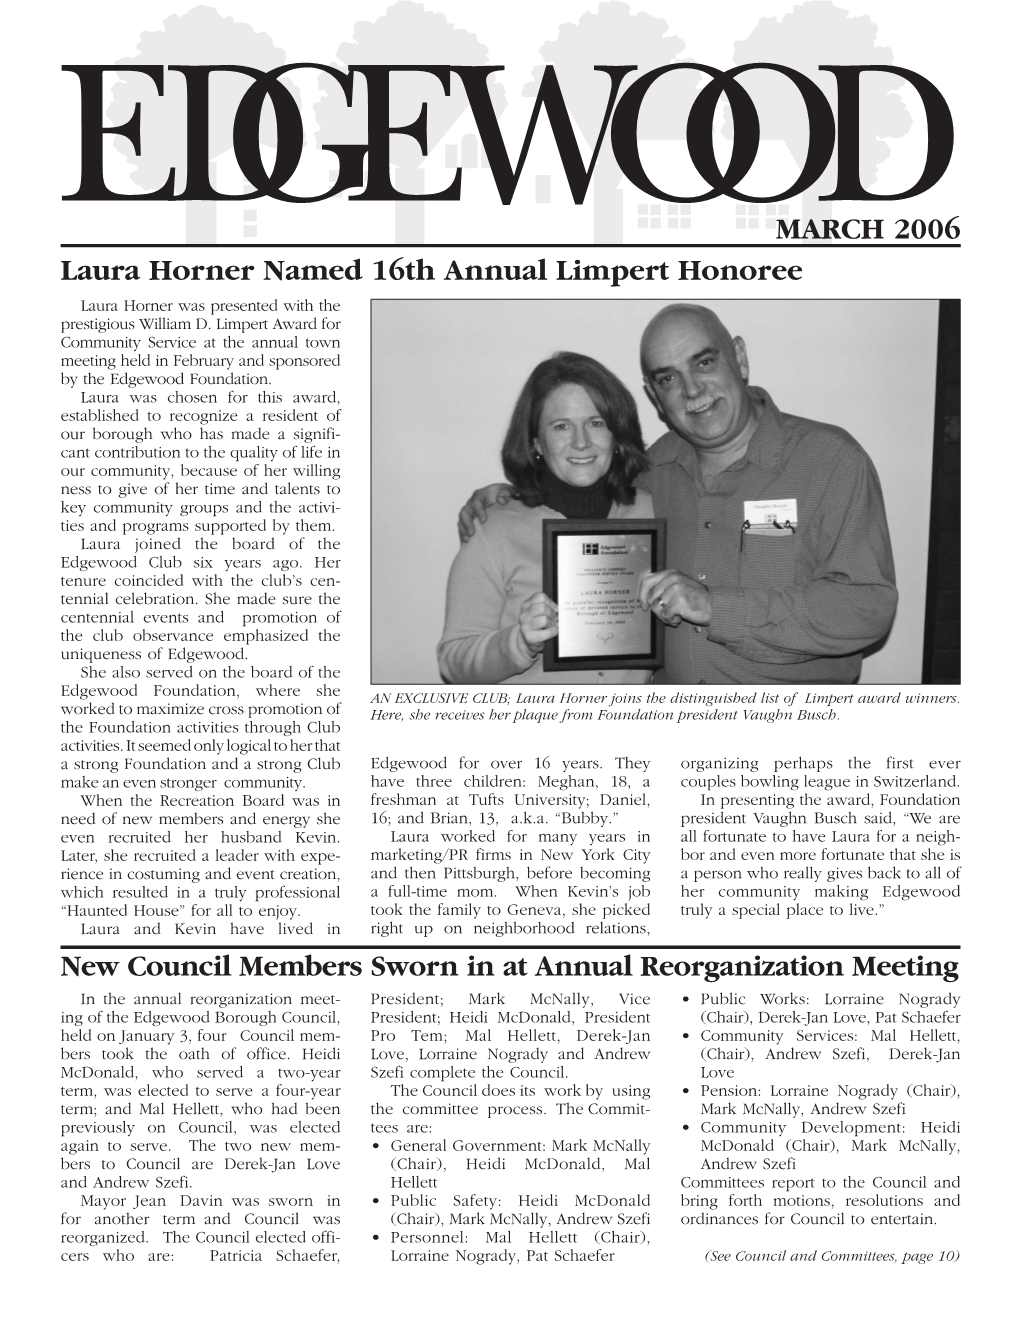 EDGEWOODMARCH 2006 Laura Horner Named 16Th Annual Limpert Honoree Laura Horner Was Presented with the Prestigious William D